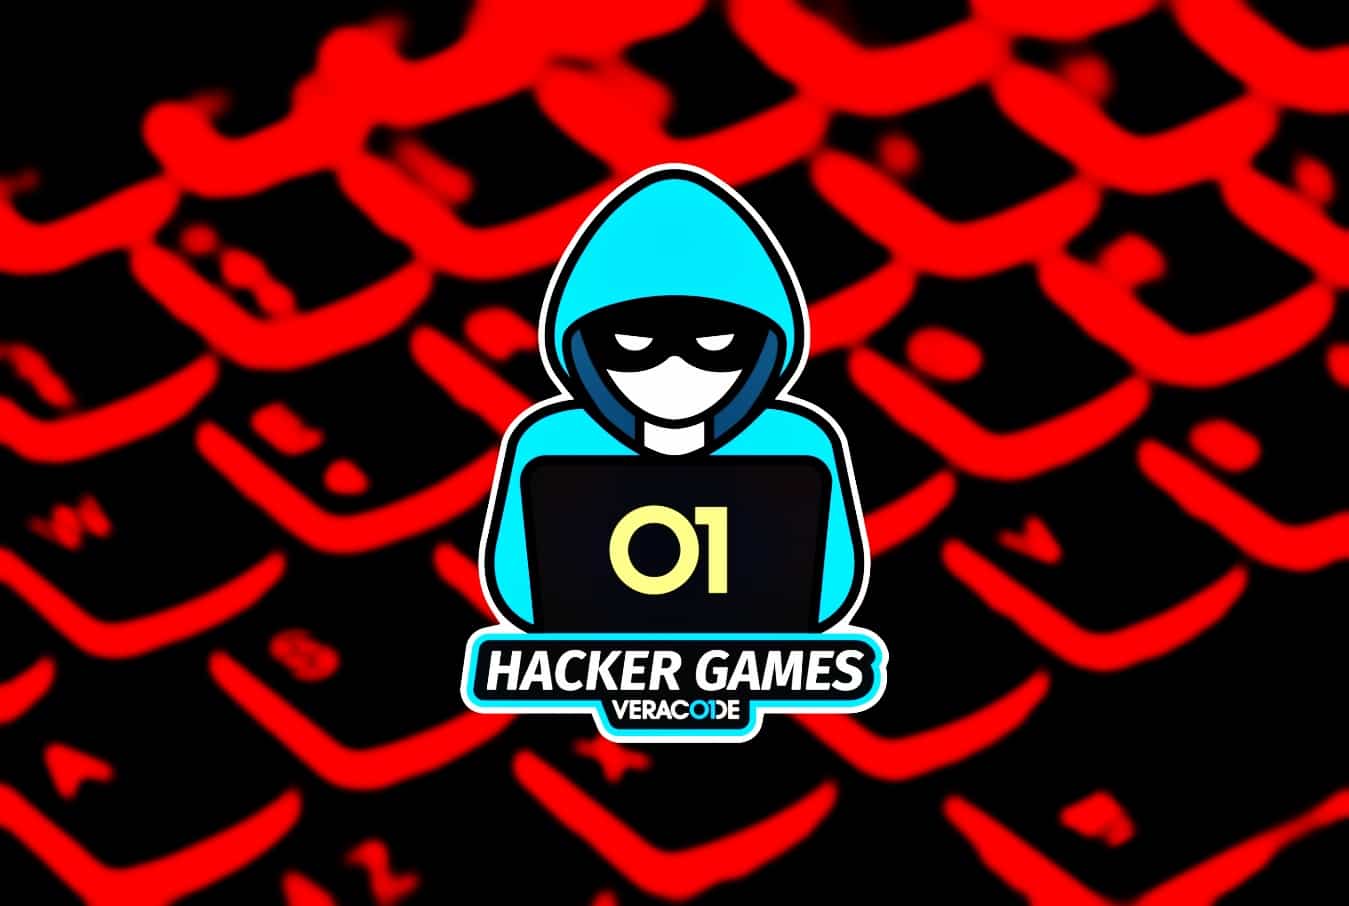 “Hacker Games” launched to challenge university students’ cybersecurity skills